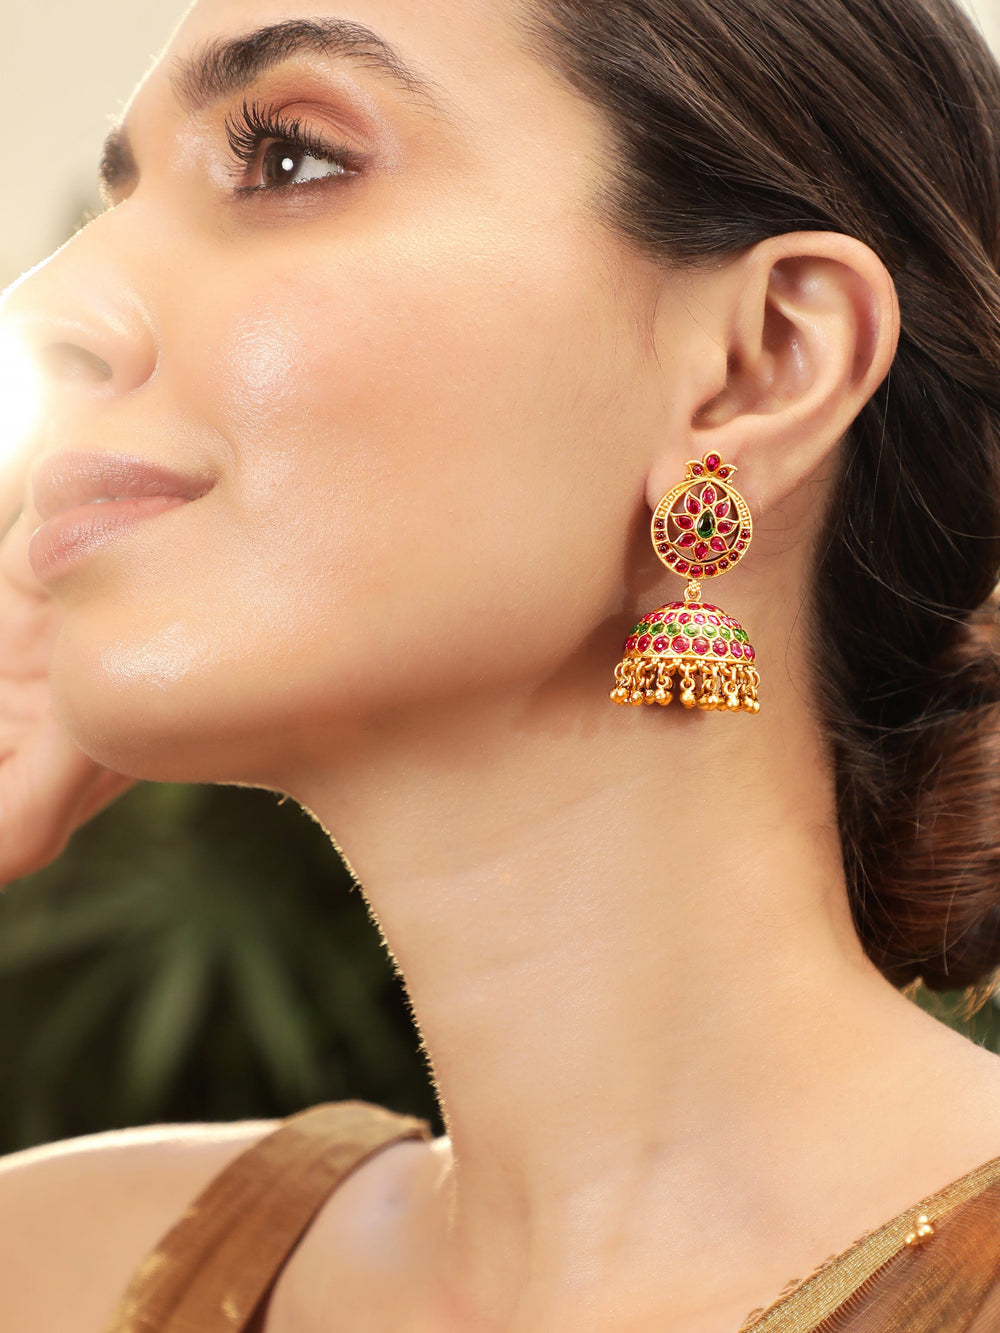 Rubans 22k Gold-Plated Dome Shape Jhumka Earrings with Red and Green Stone Earrings